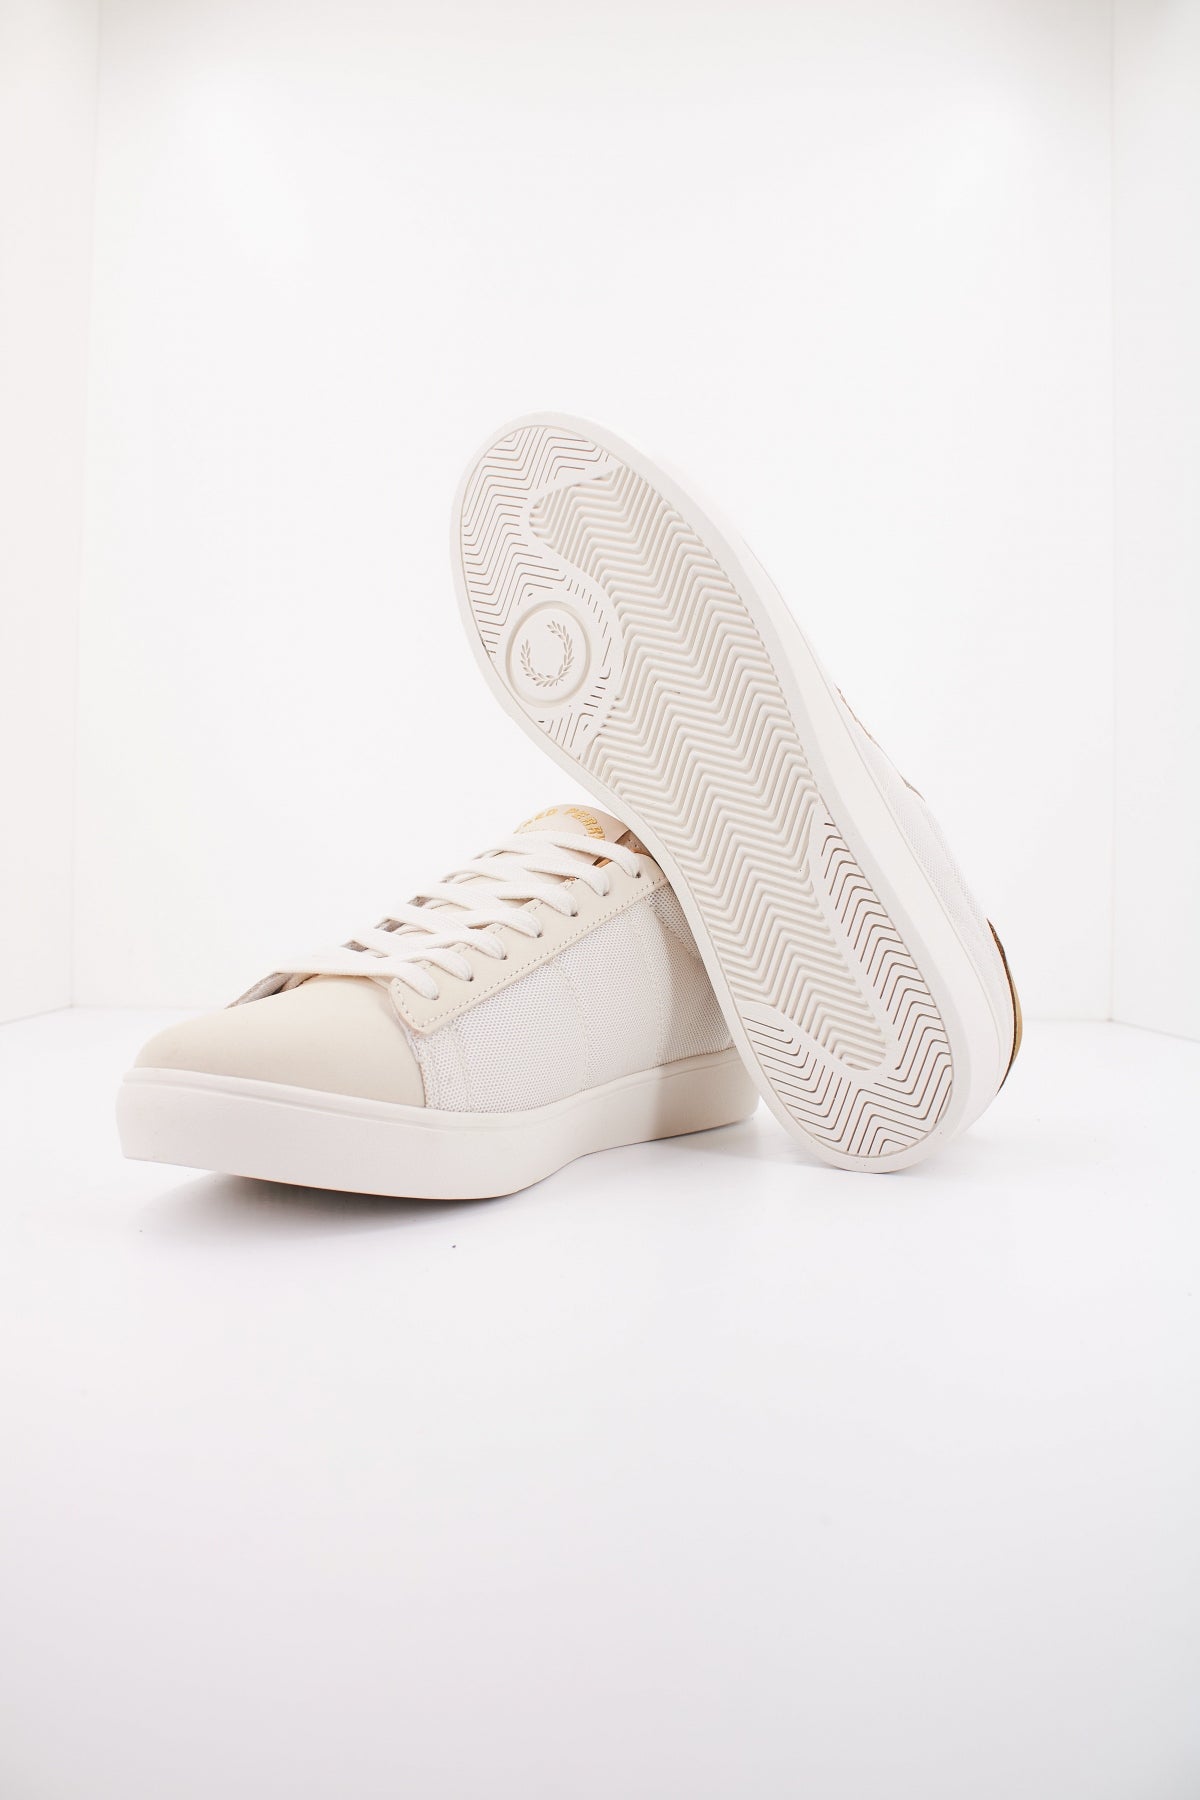 FRED PERRY SPENCER MESH/NUBUC en color BEIS  (4)